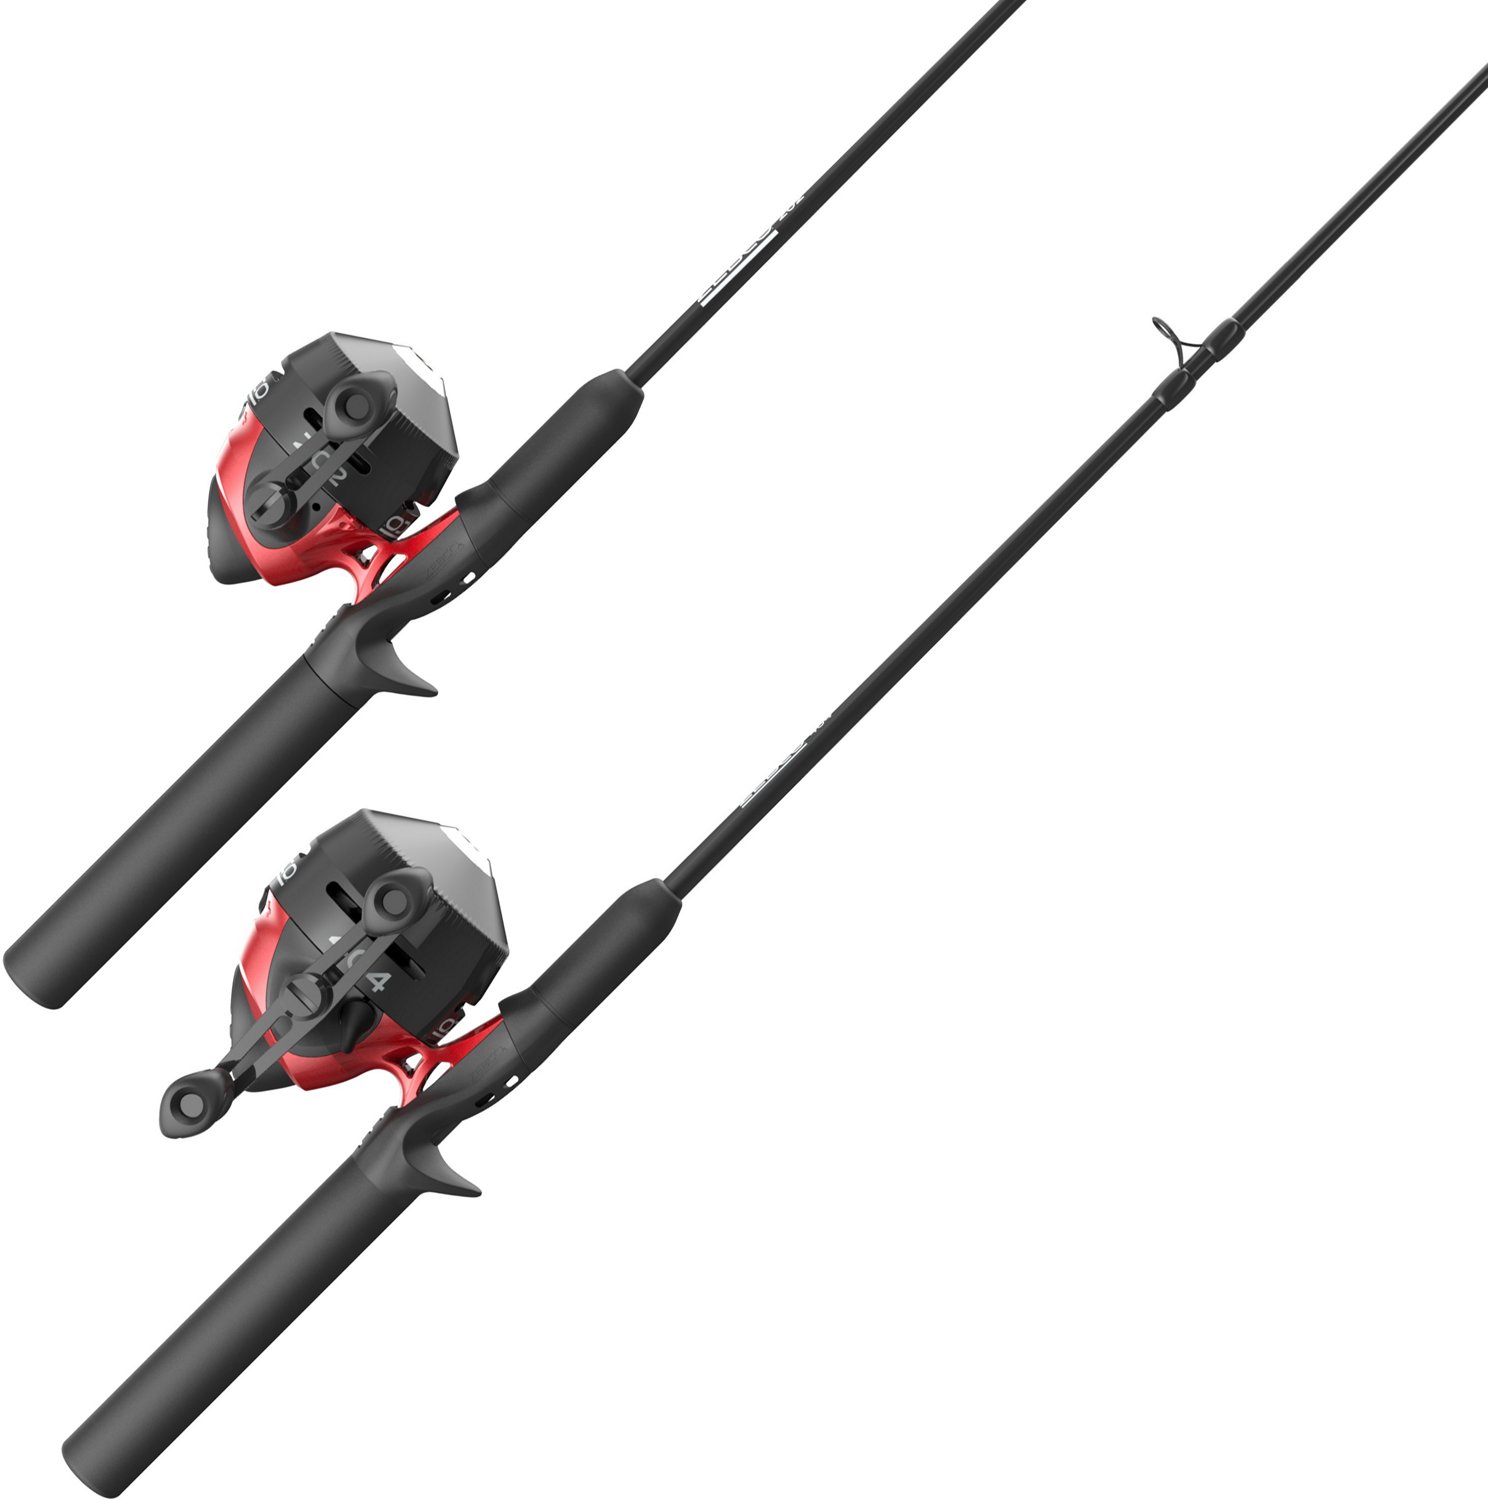 Zebco 202 and 404 5 ft 6 in Spincast Rod and Reel Combo